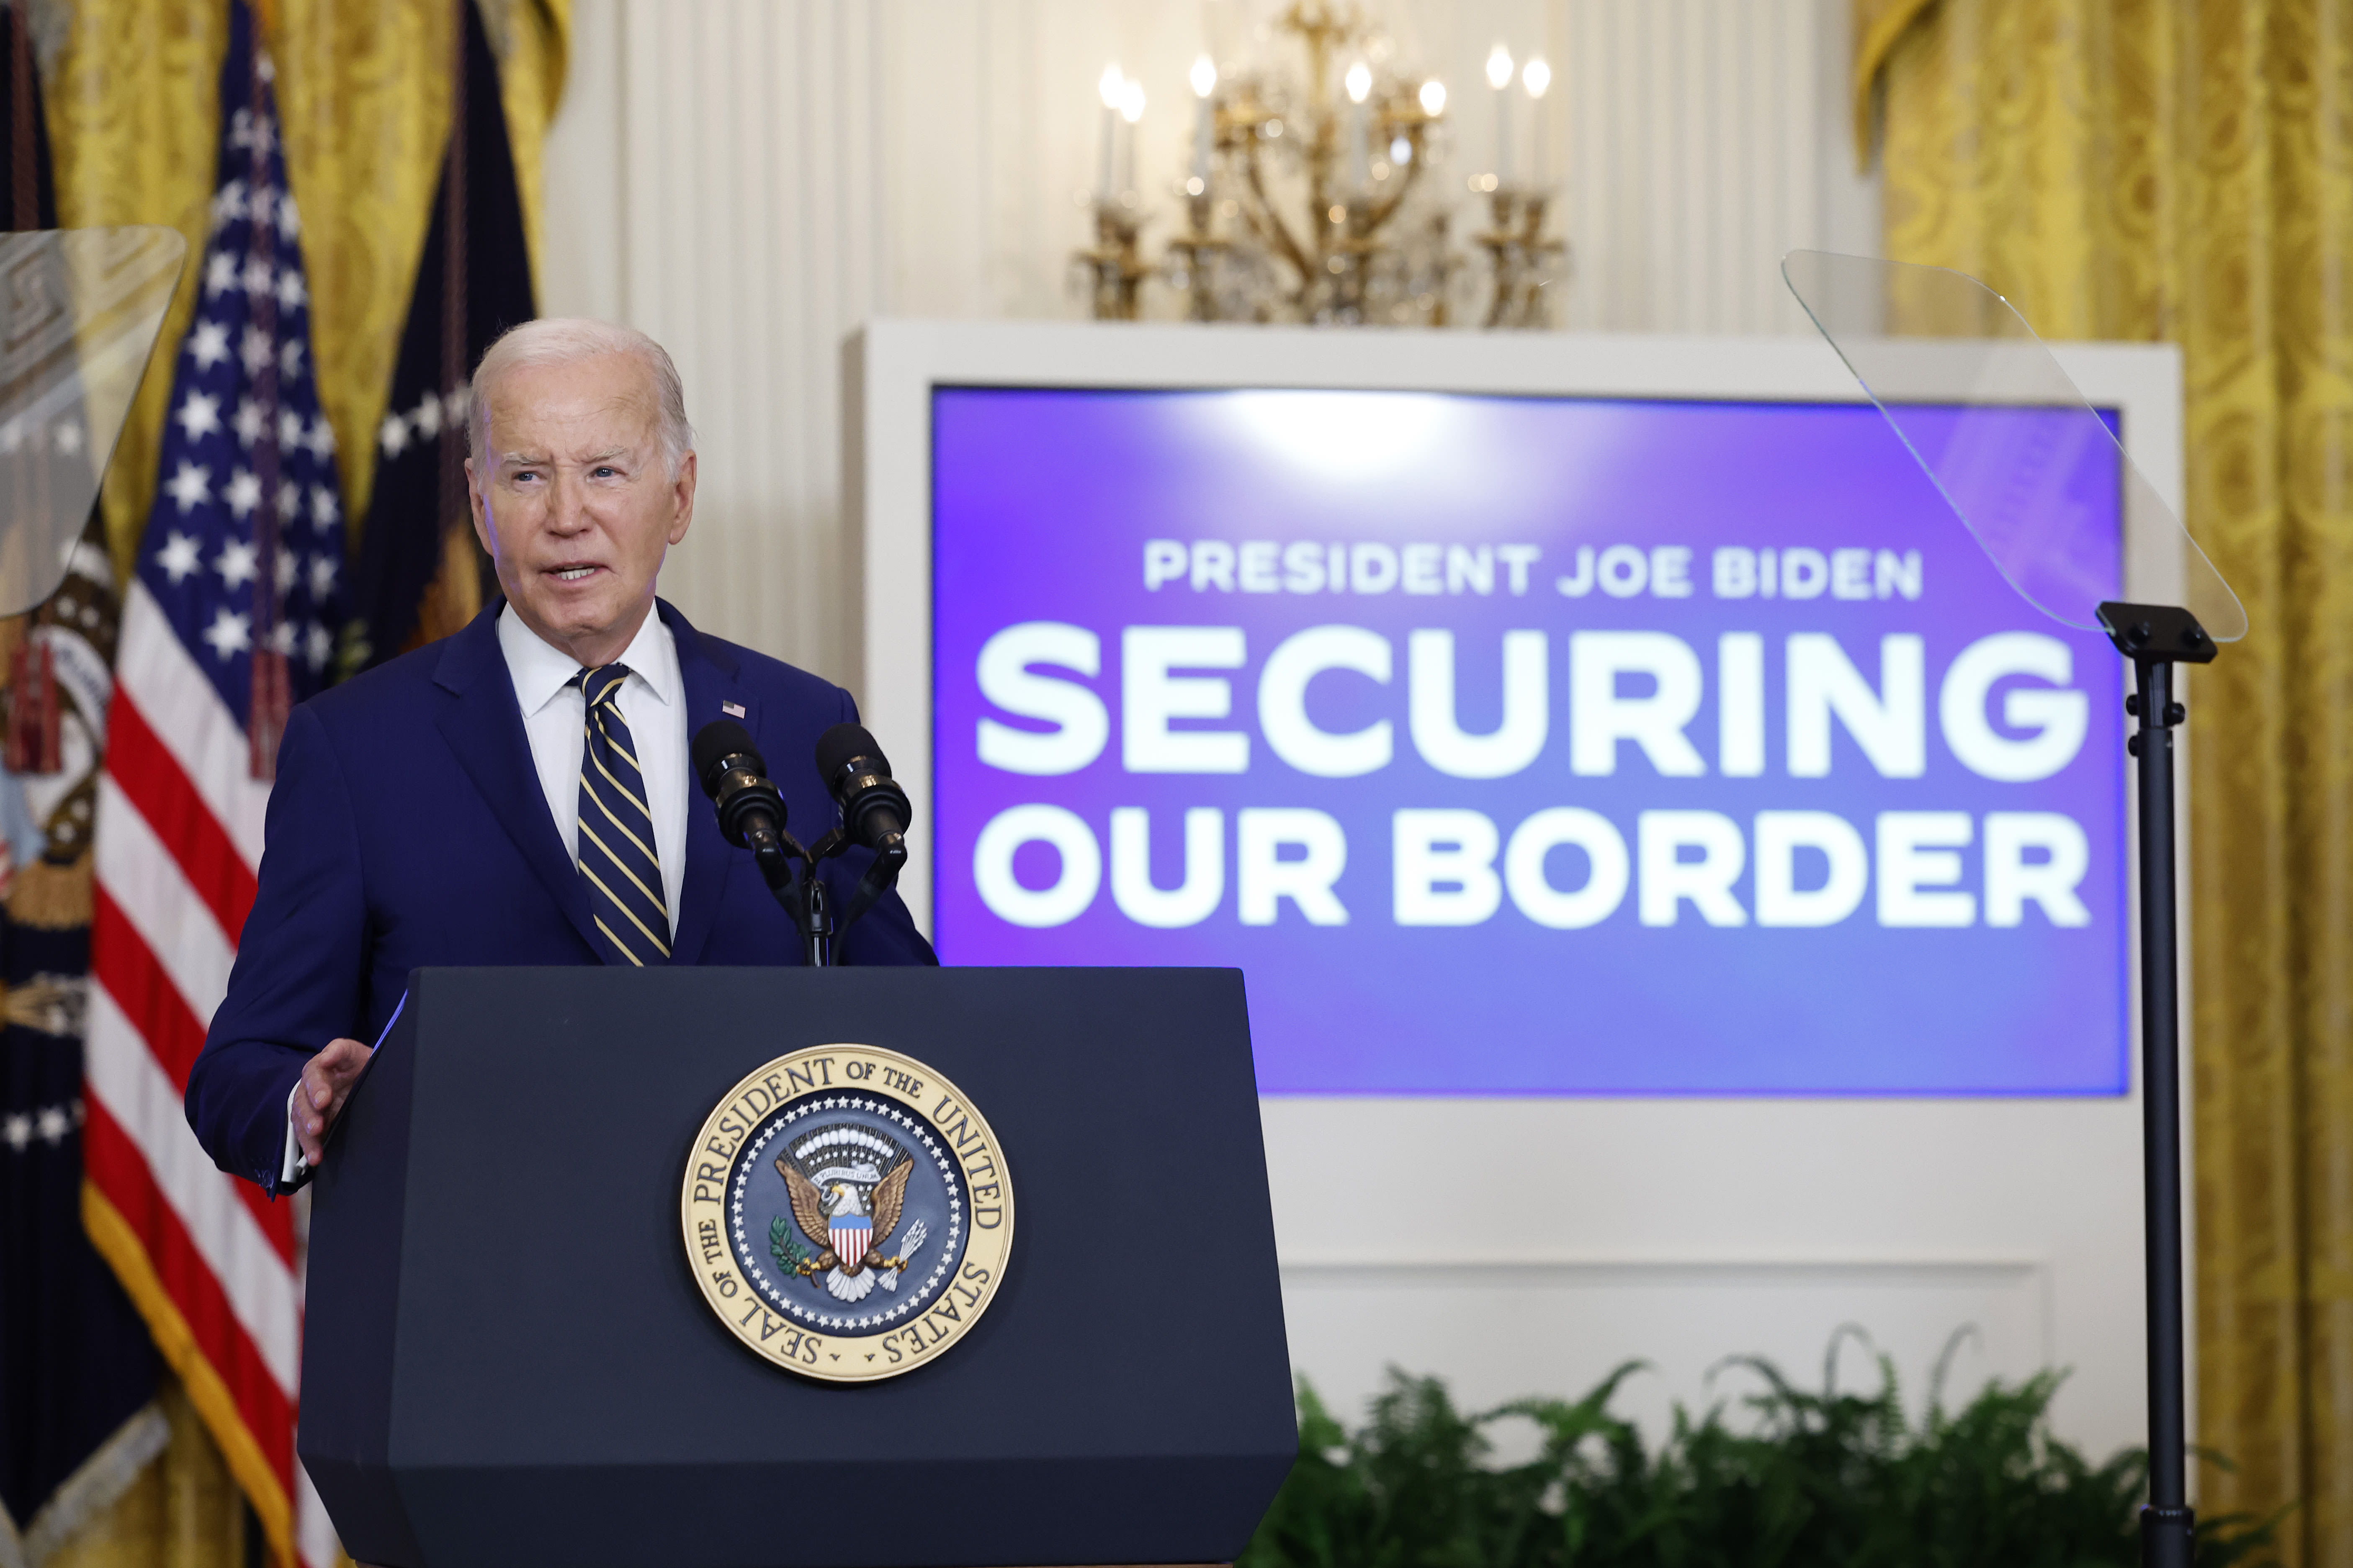 New Biden order seeks to crack down on migration at the southern border. What does it mean, and how will it affect asylum seekers?